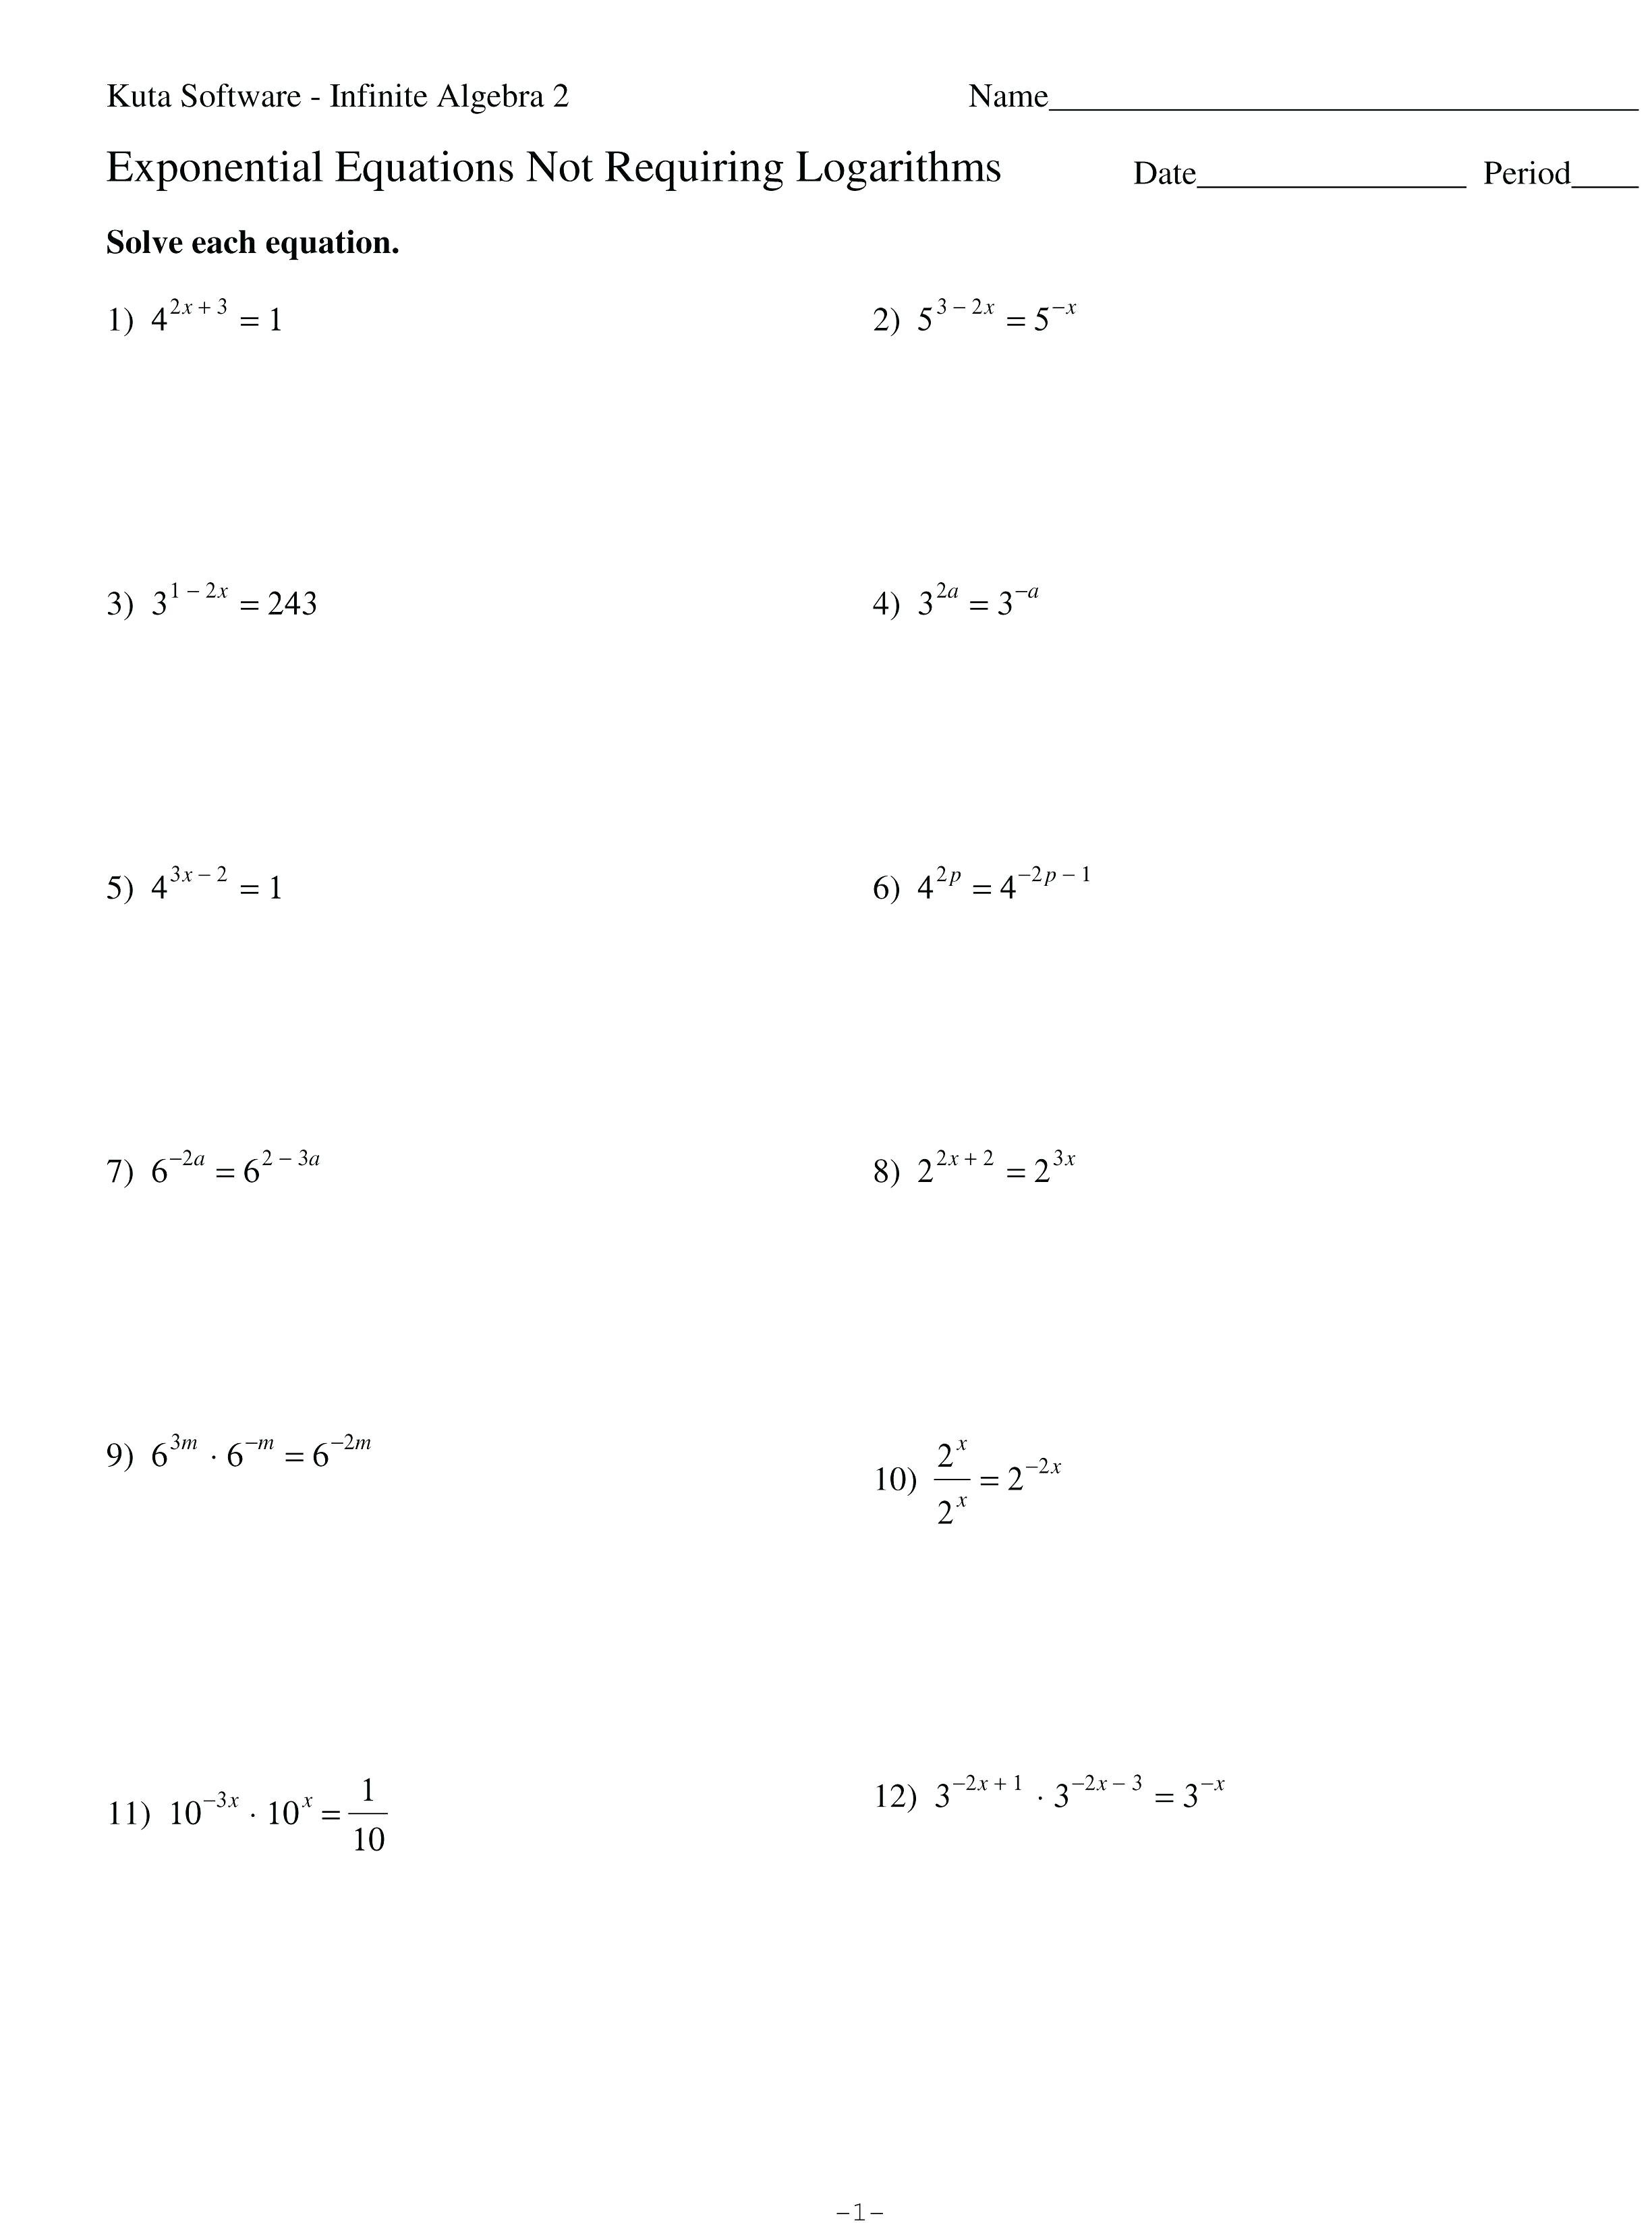 Exponential Equations Worksheet Math Solving Exponential Equations Together With Solving Exponential Equations Worksheet